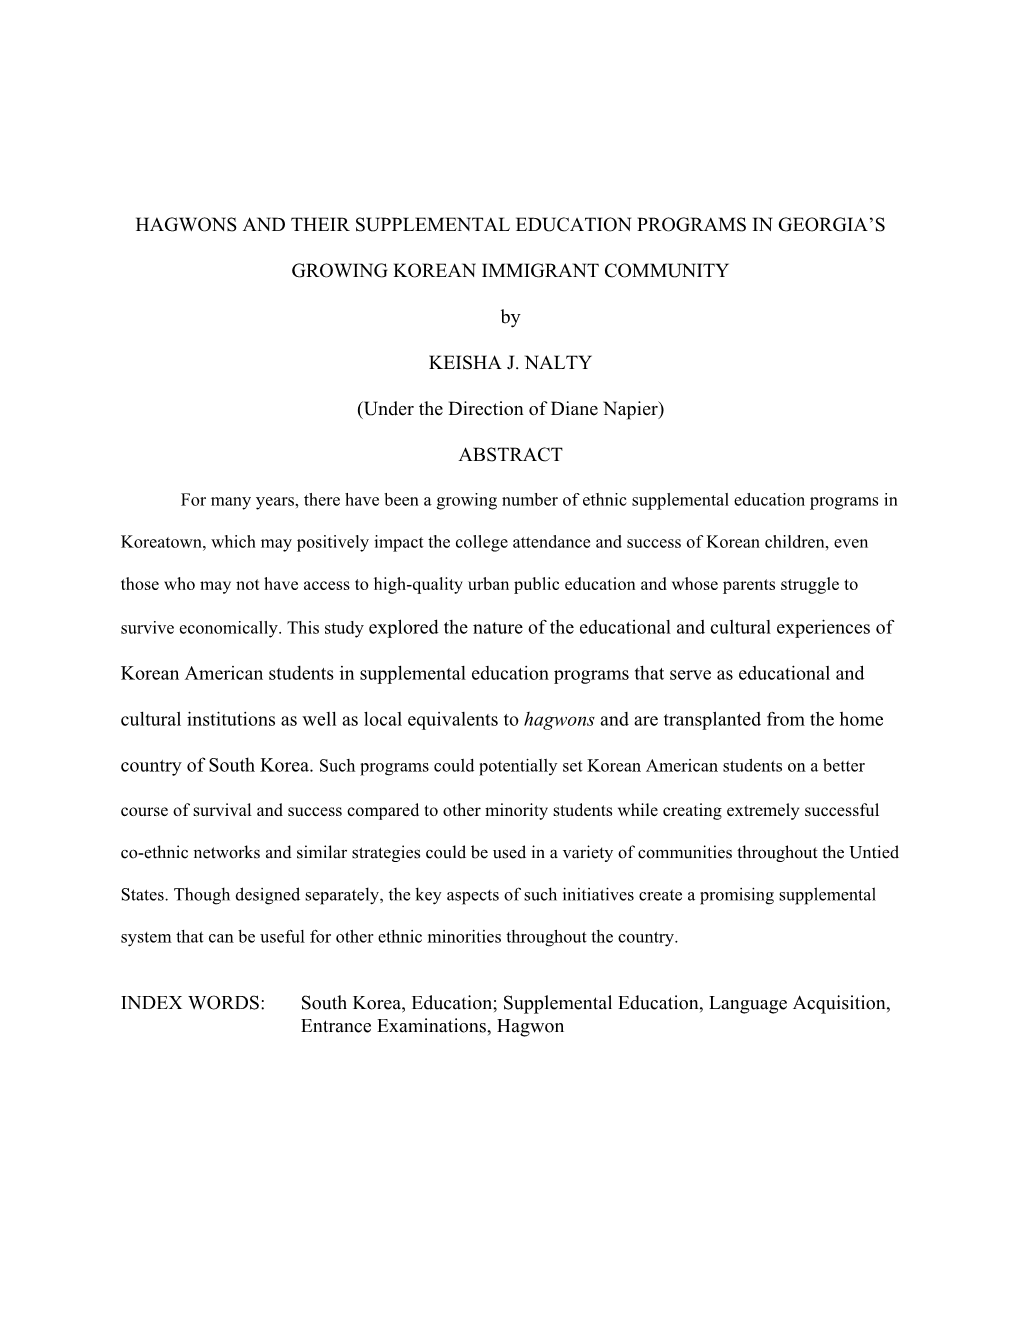 HAGWONS and THEIR SUPPLEMENTAL EDUCATION PROGRAMS in GEORGIA's GROWING KOREAN IMMIGRANT COMMUNITY by KEISHA J. NALTY (Under Th